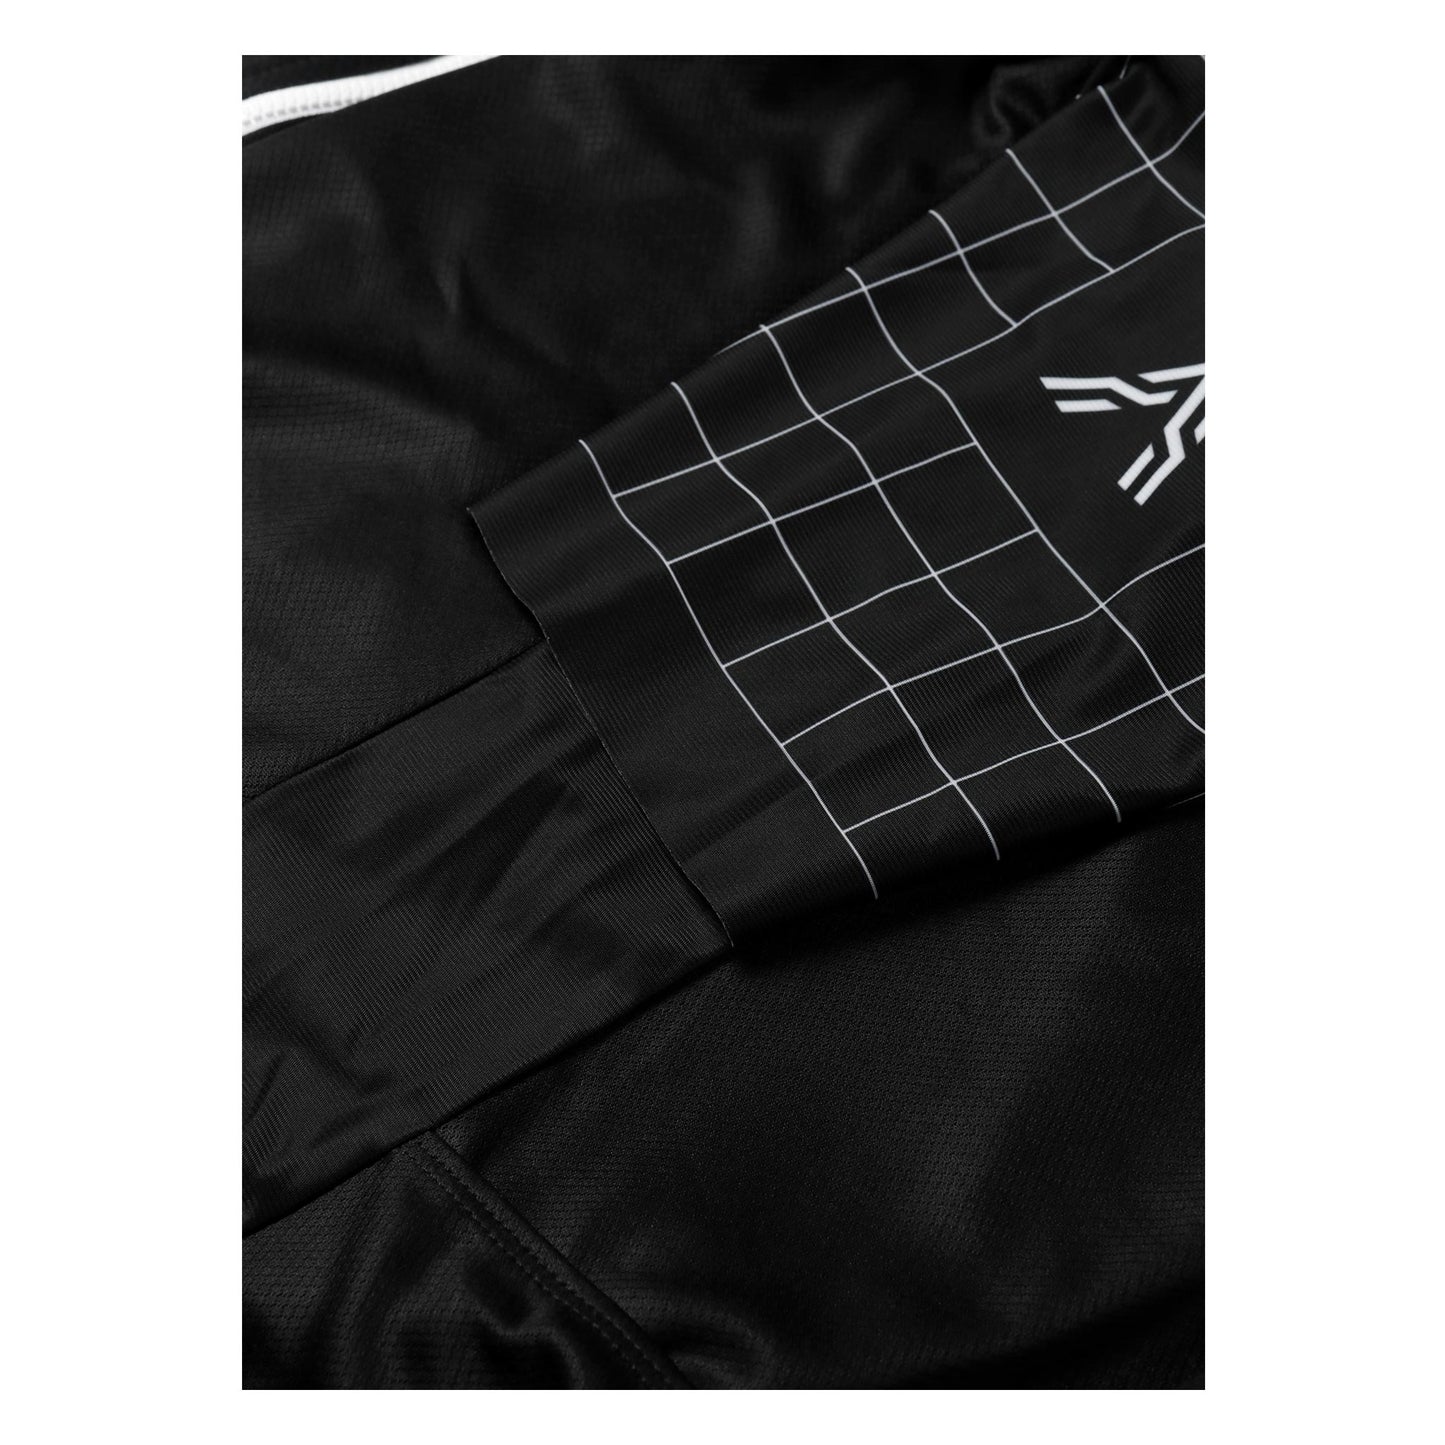 Supernova Sustainable Short Sleeves Cycling Jersey Black from Ascender Cycling Club Zürich Switzerland Soft Touch Aerodynamic Laser Cut Sleeves View